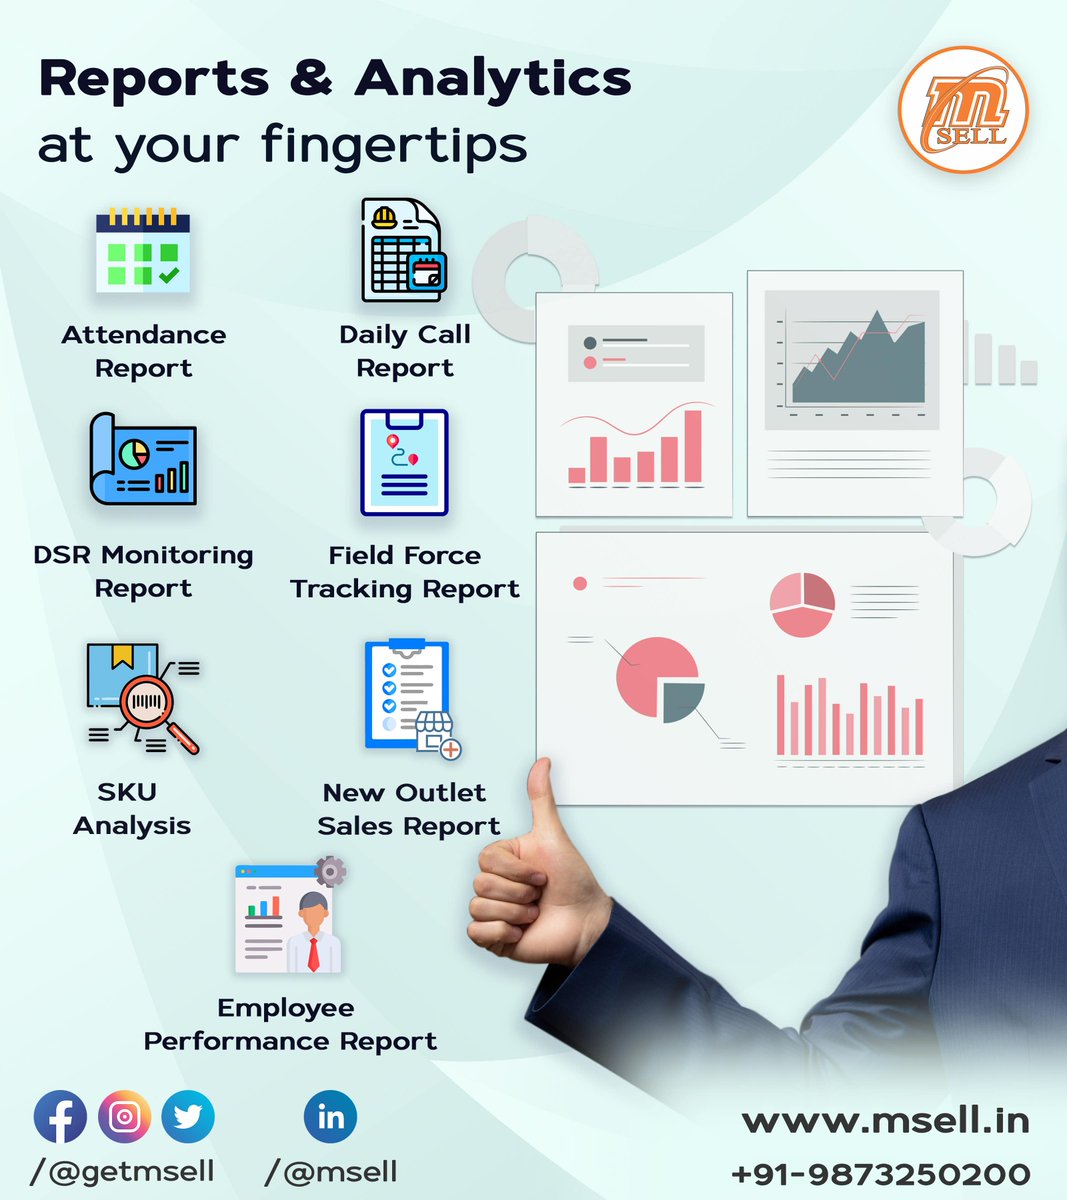 Analyze the data of your sales in one place and make effective decisions with mSELL - Sales Automation Solution.

Contact us directly @ +91-9873250200.

#salesforceautomation #salesautomation #fmcgindustry #fmcg #cpg #cpgindustry #saas #msmesector #india #foodandbeverage